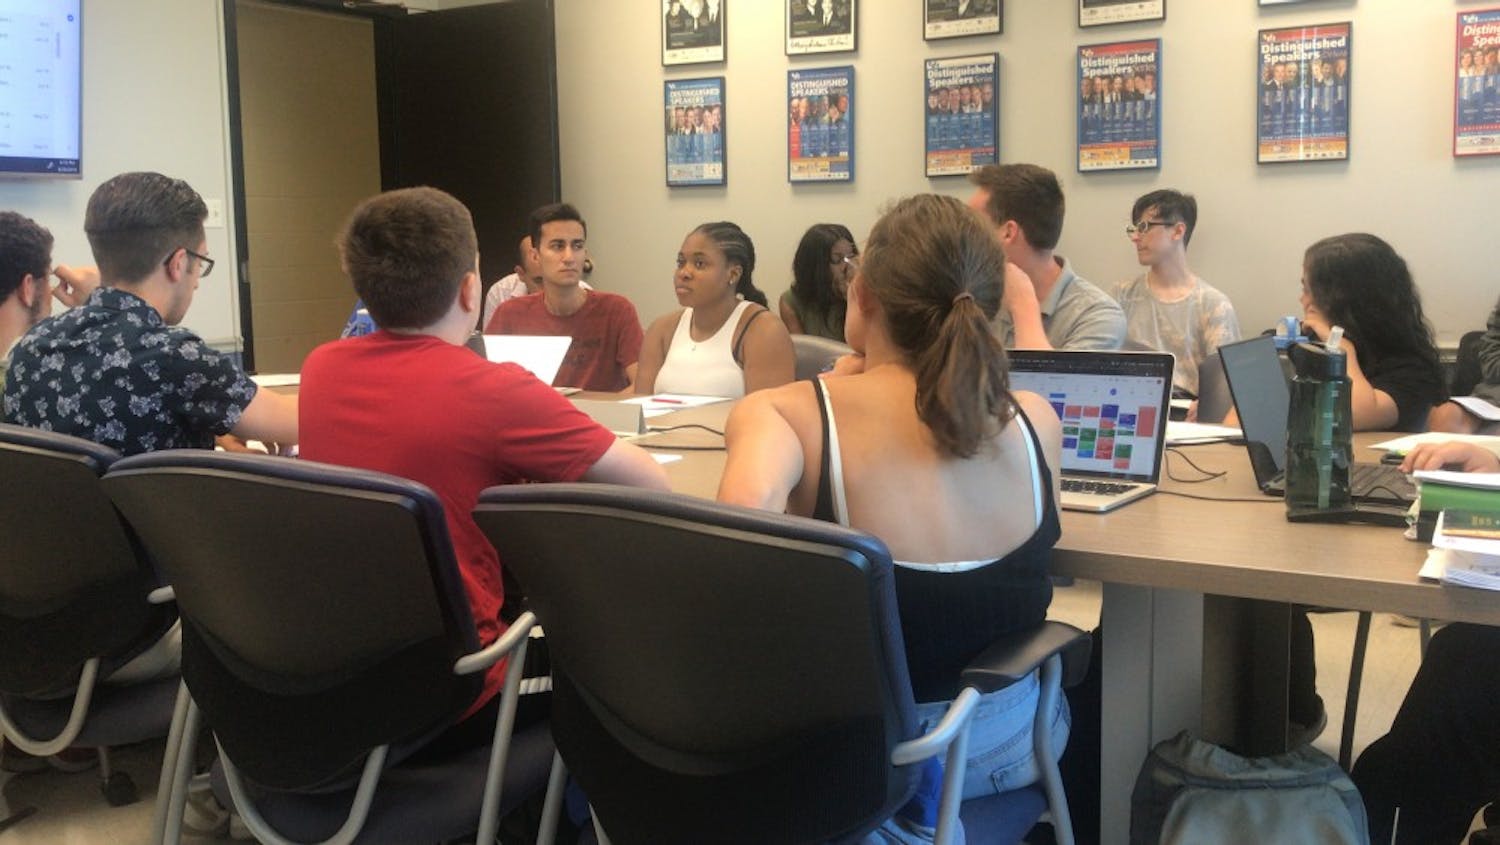 Josh Korman, Student Association’s attorney, attended the Board of Directors meeting on Thursday to discuss the changes to SA with it becoming a not-for-profit.